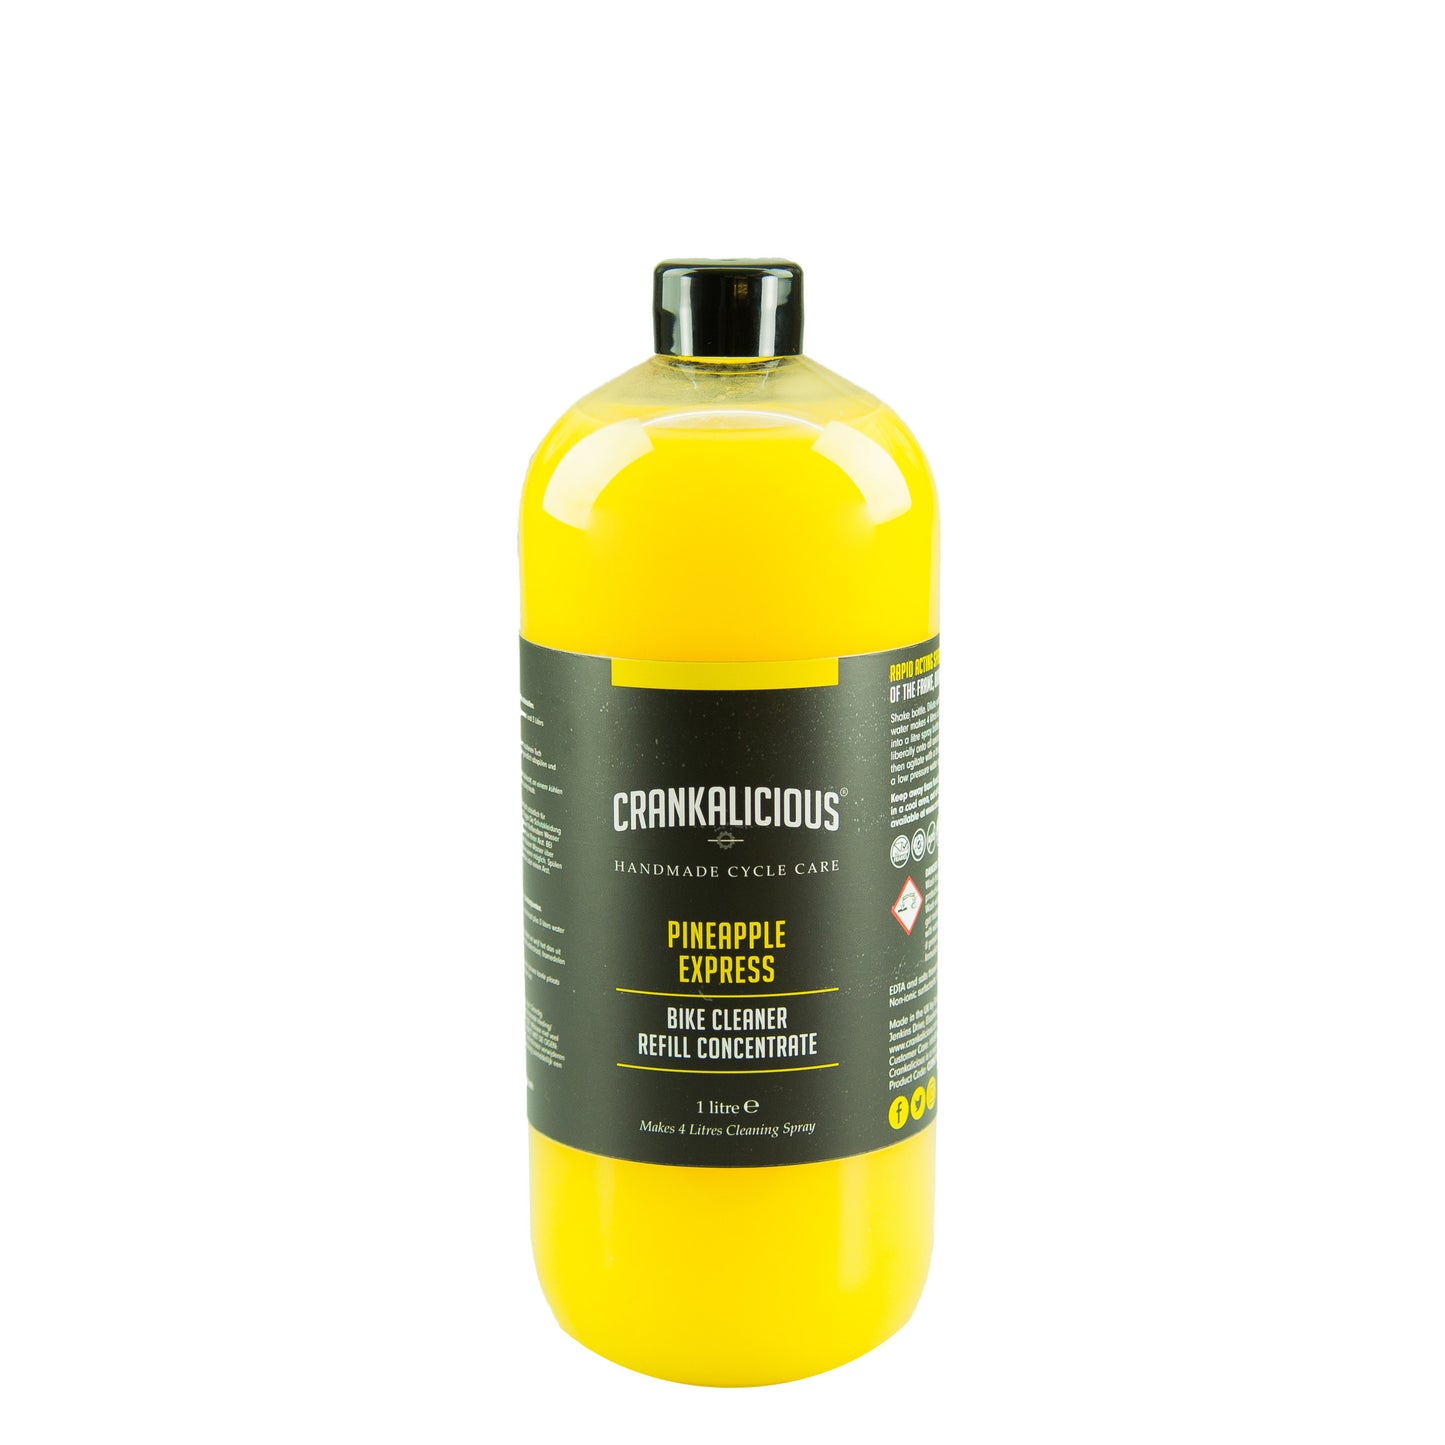 Pineapple Express spray wash 1 litre concentrate/refill - Trade Case (x6) - HS 340530, Bike Wash - Crankalicious